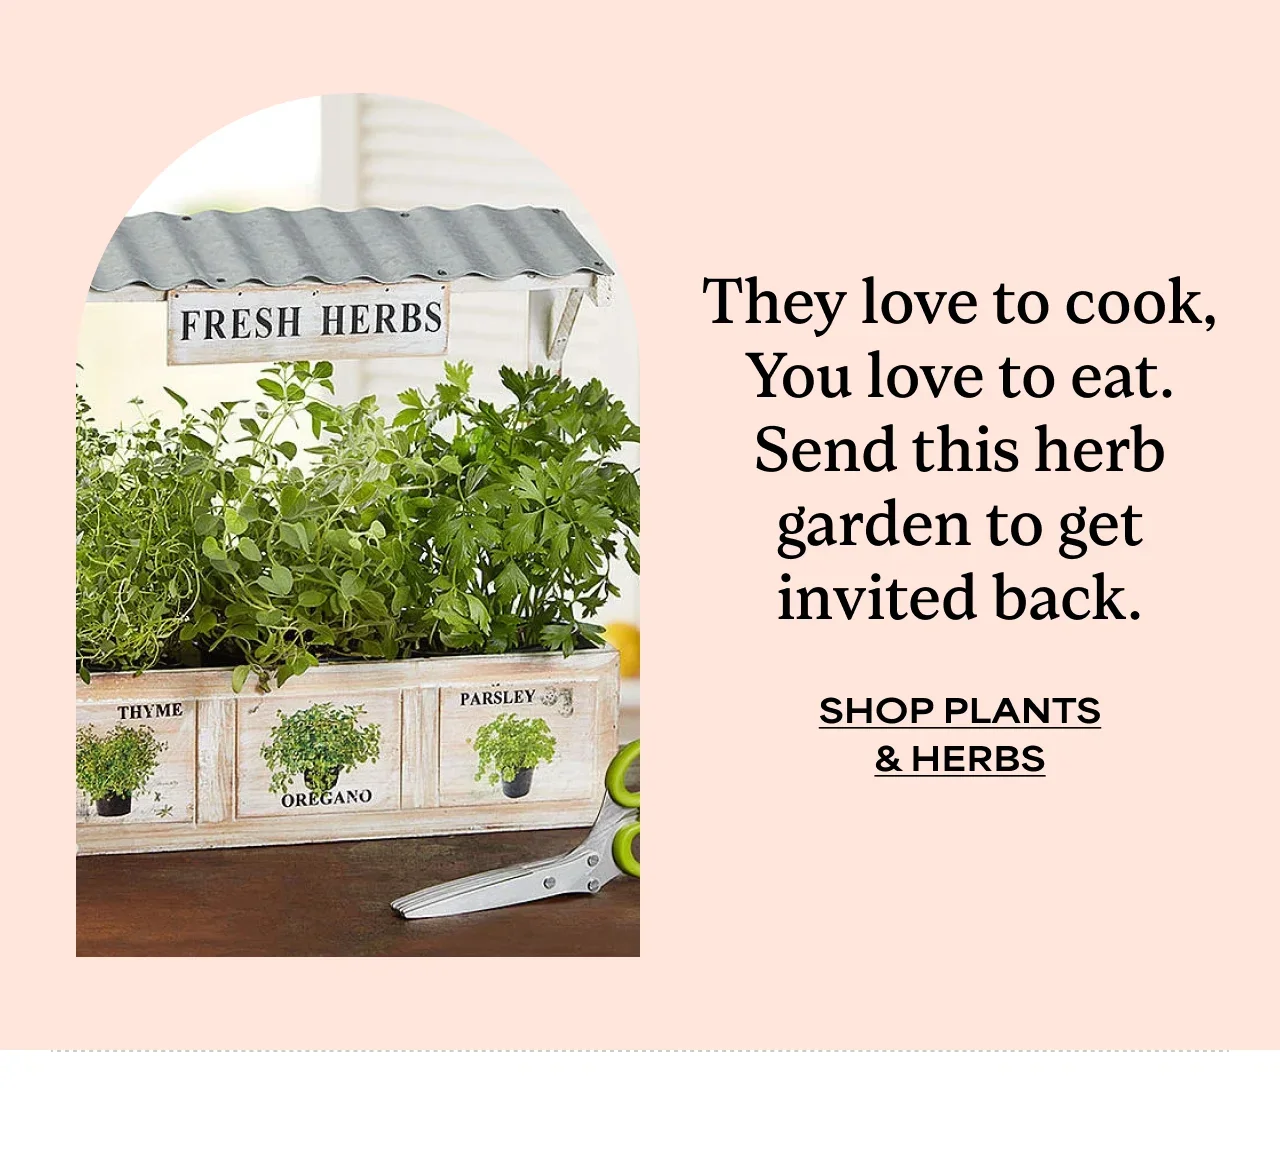 SHOP PLANTS AND HERBS